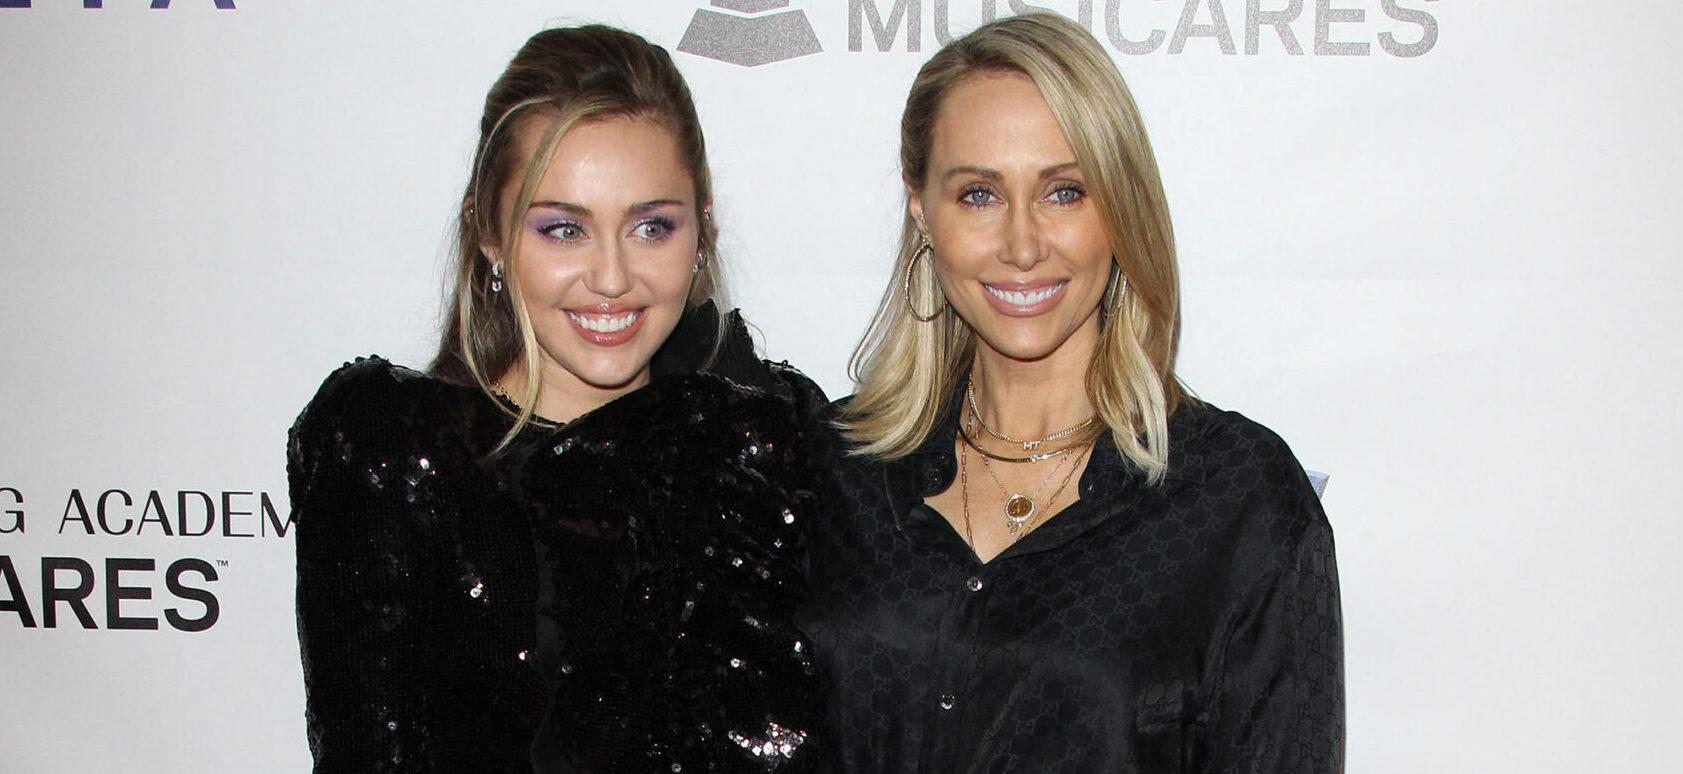 Miley Cyrus Gushes About Her Mom Tish’s ‘Genuine Love’ With ‘Prison Break’ Star Dominic Purcell